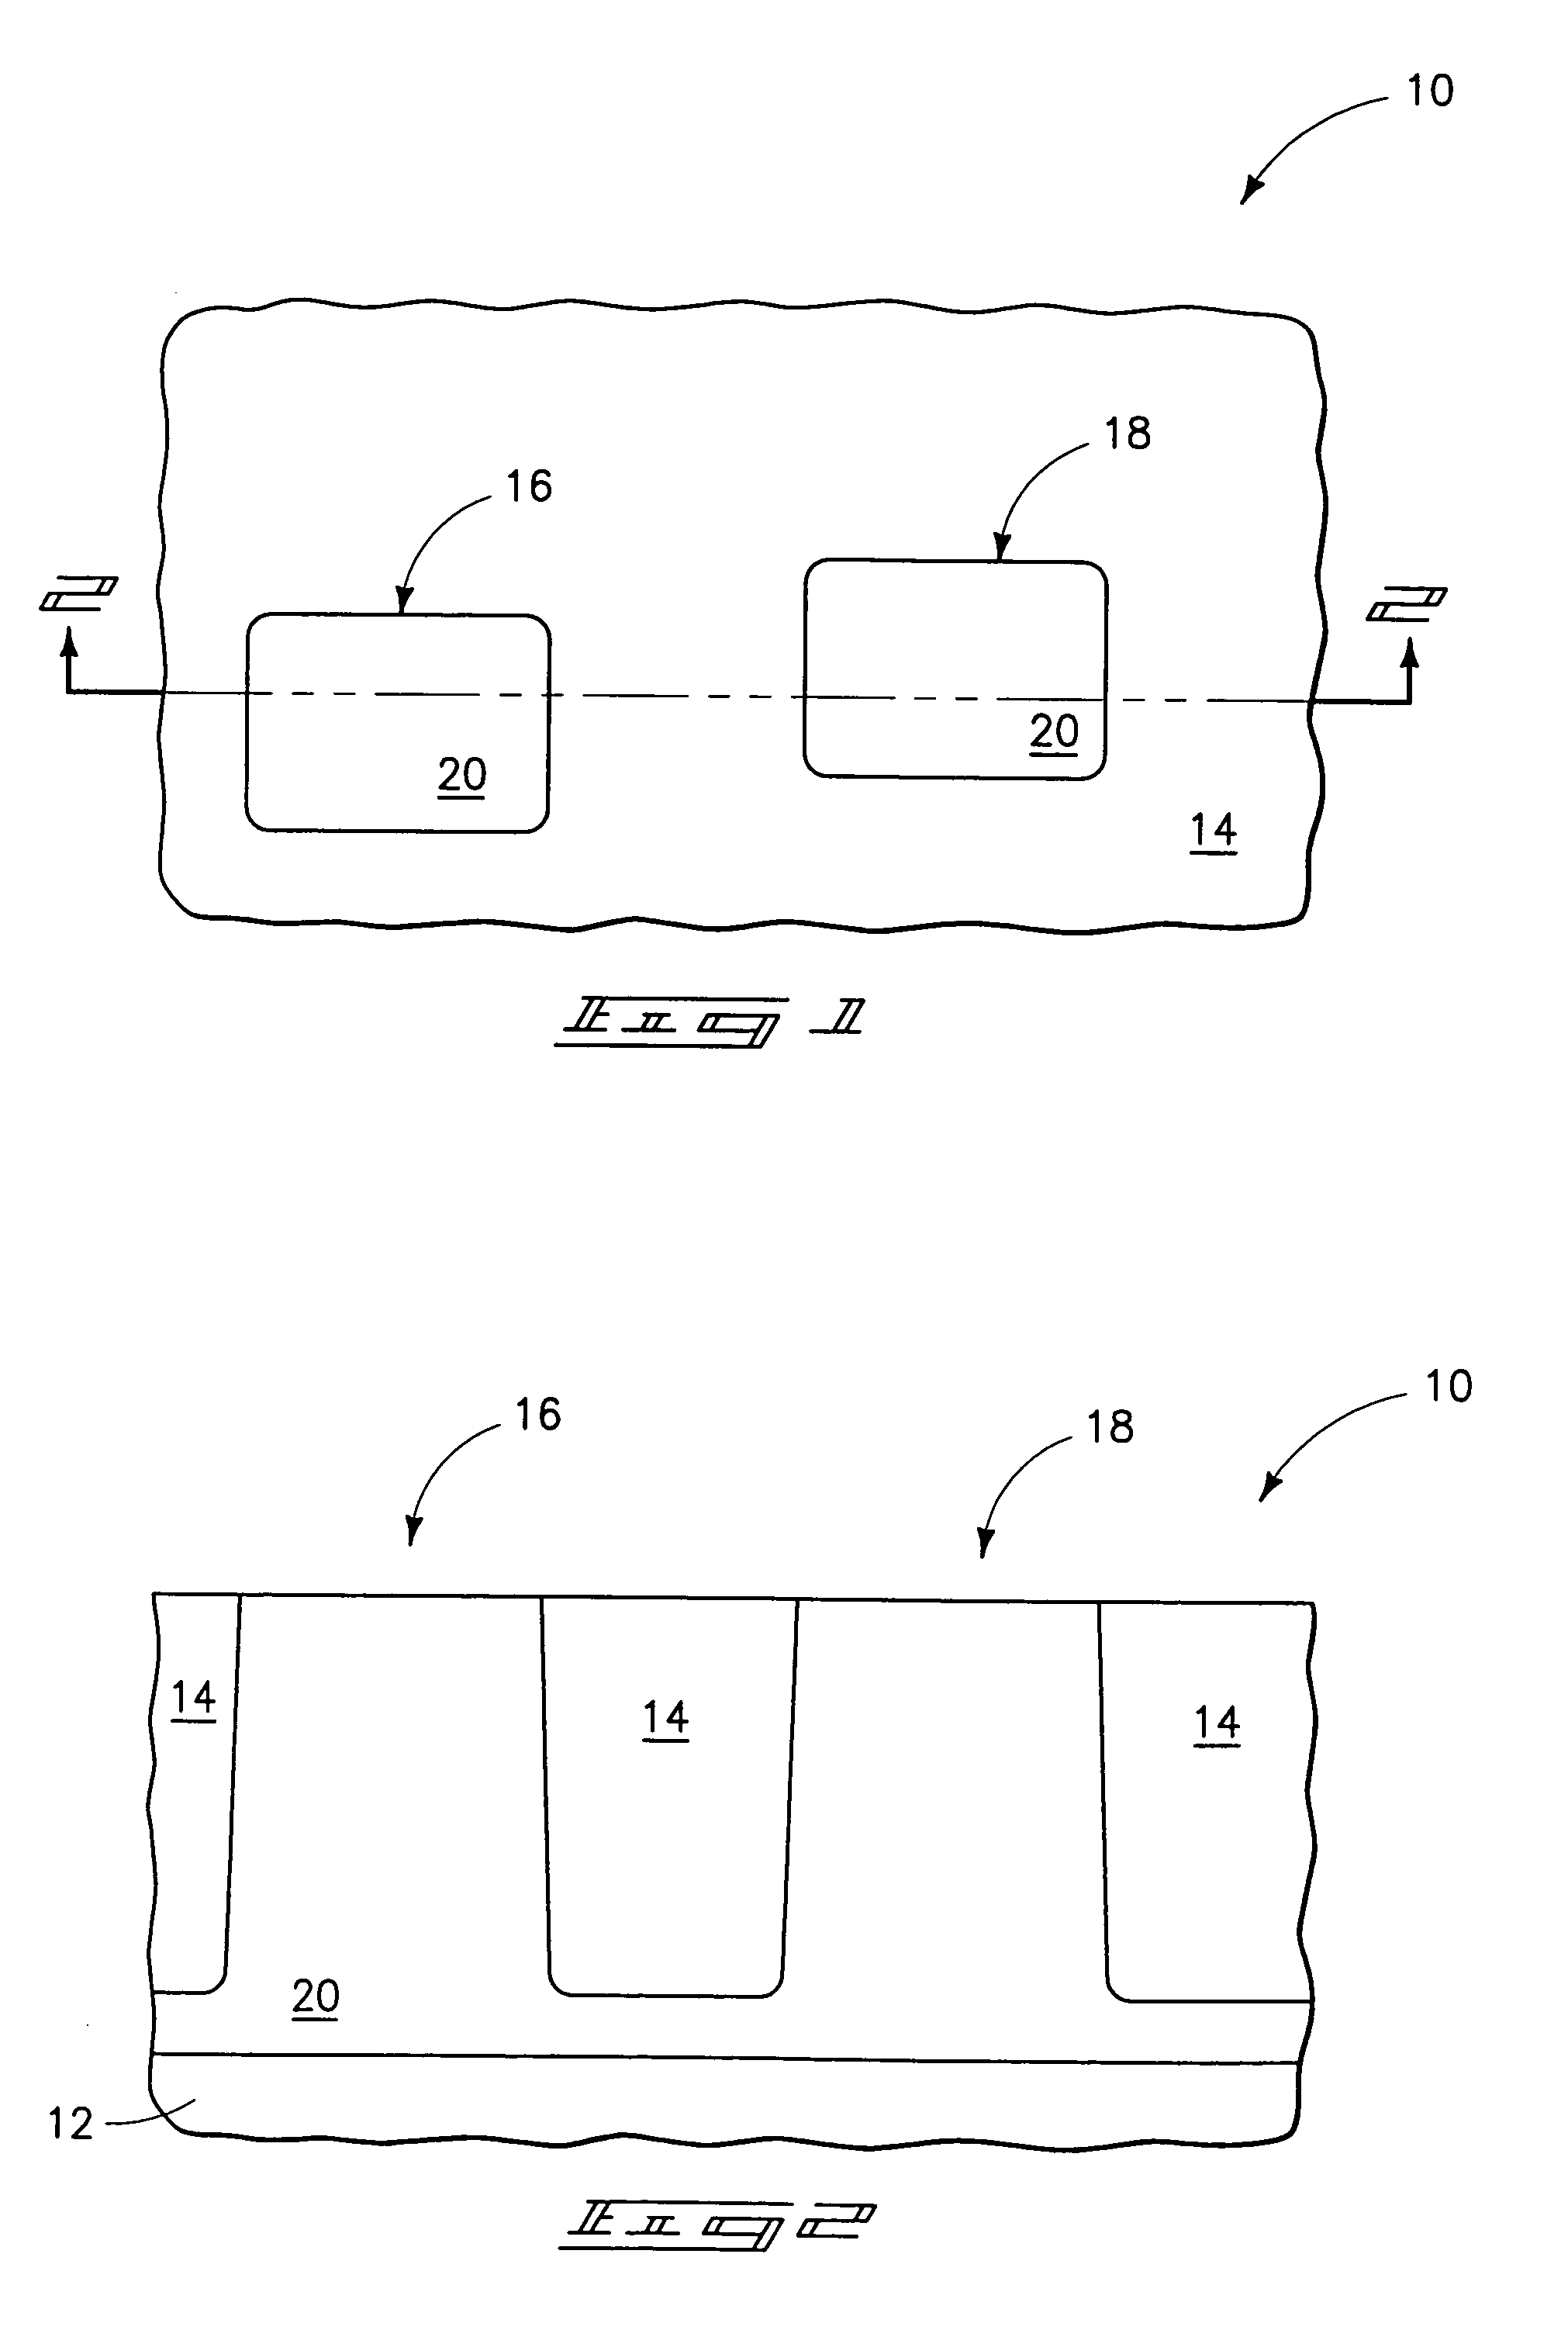 Methods of forming field effect transistors on substrates